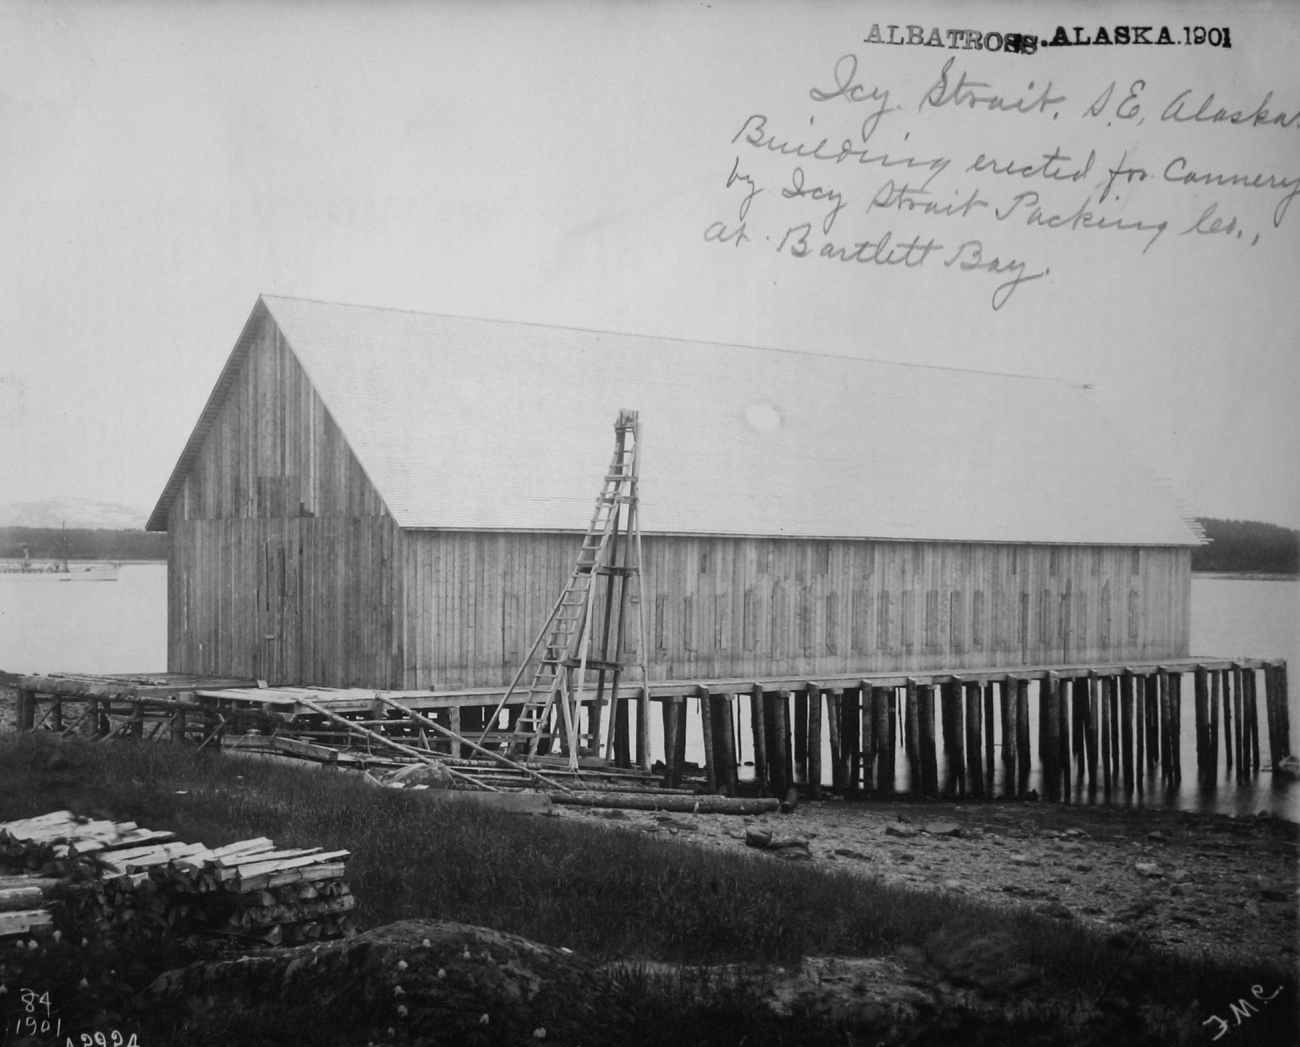 Albatross, AK, 1901, Icy Strait, building erected for cannery byIcy Strait Packing Co